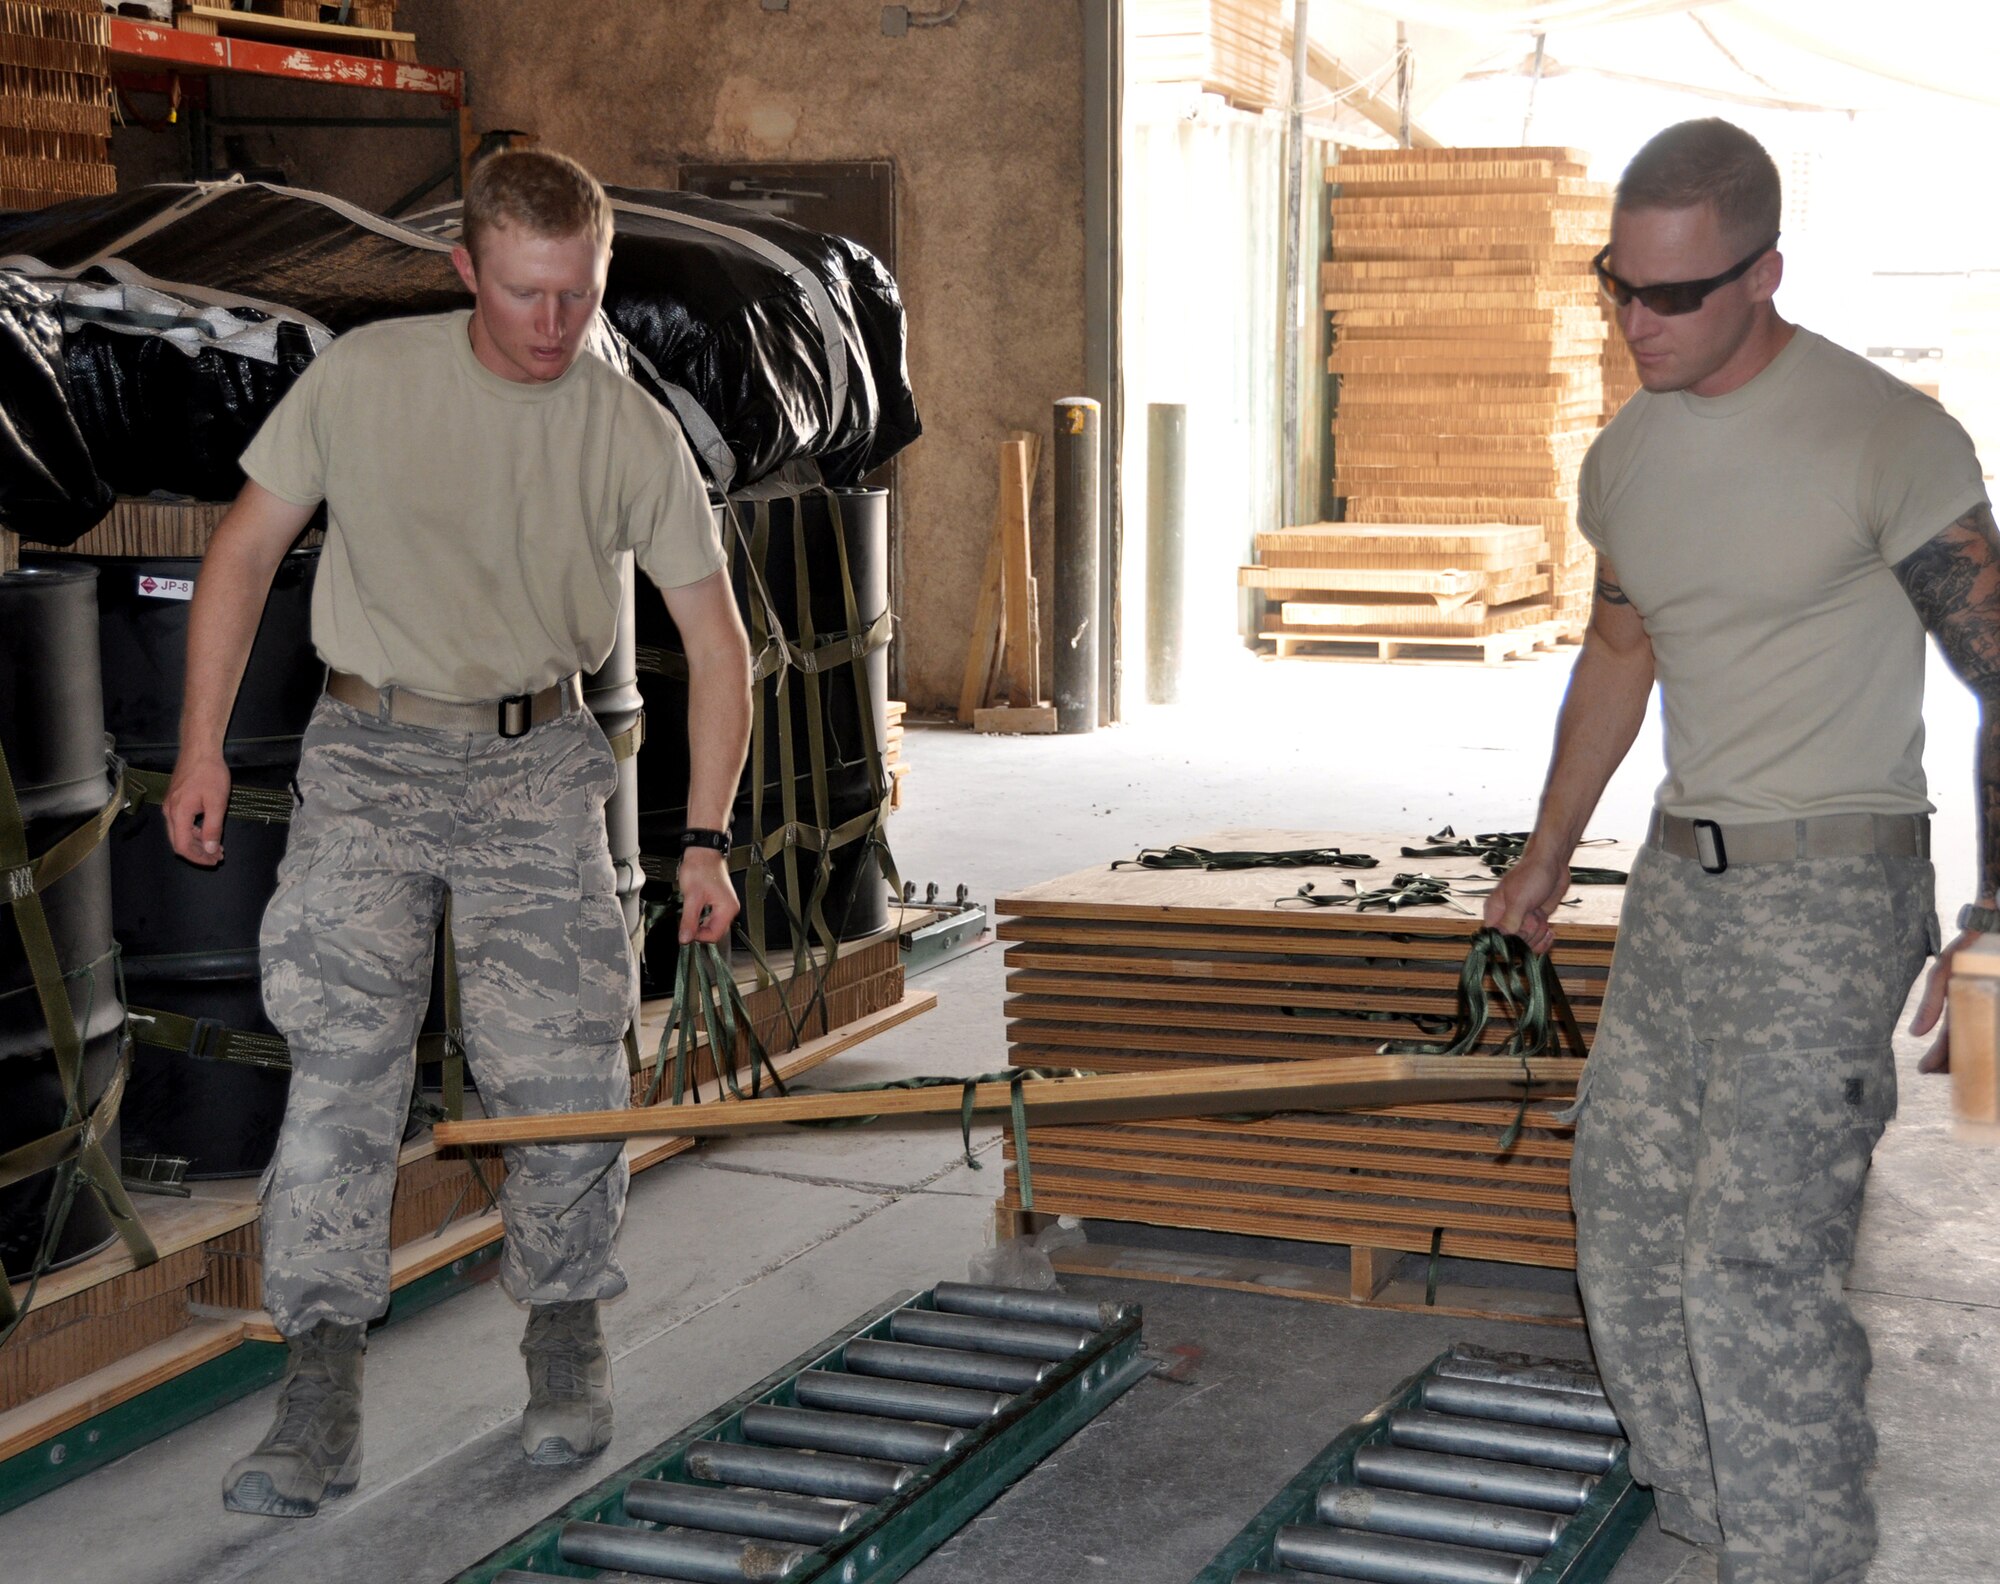 U.S. Air Force Academy Cadet 1st Class Jordan Wittman helps Staff Sgt. Matthew Jones lay out bare pallets on the assembly line at the U.S. Army Riggers detachment June 18, 2011, in Southwest Asia. Cadet Wittman is taking part of "Deployed Ops", a summer program that sends Academy cadets to deployed locations to follow officers in different career fields and to gain an understanding of career responsibilities. (U.S. Air Force photo/Cadet 1st Class Shaina Thompson)
